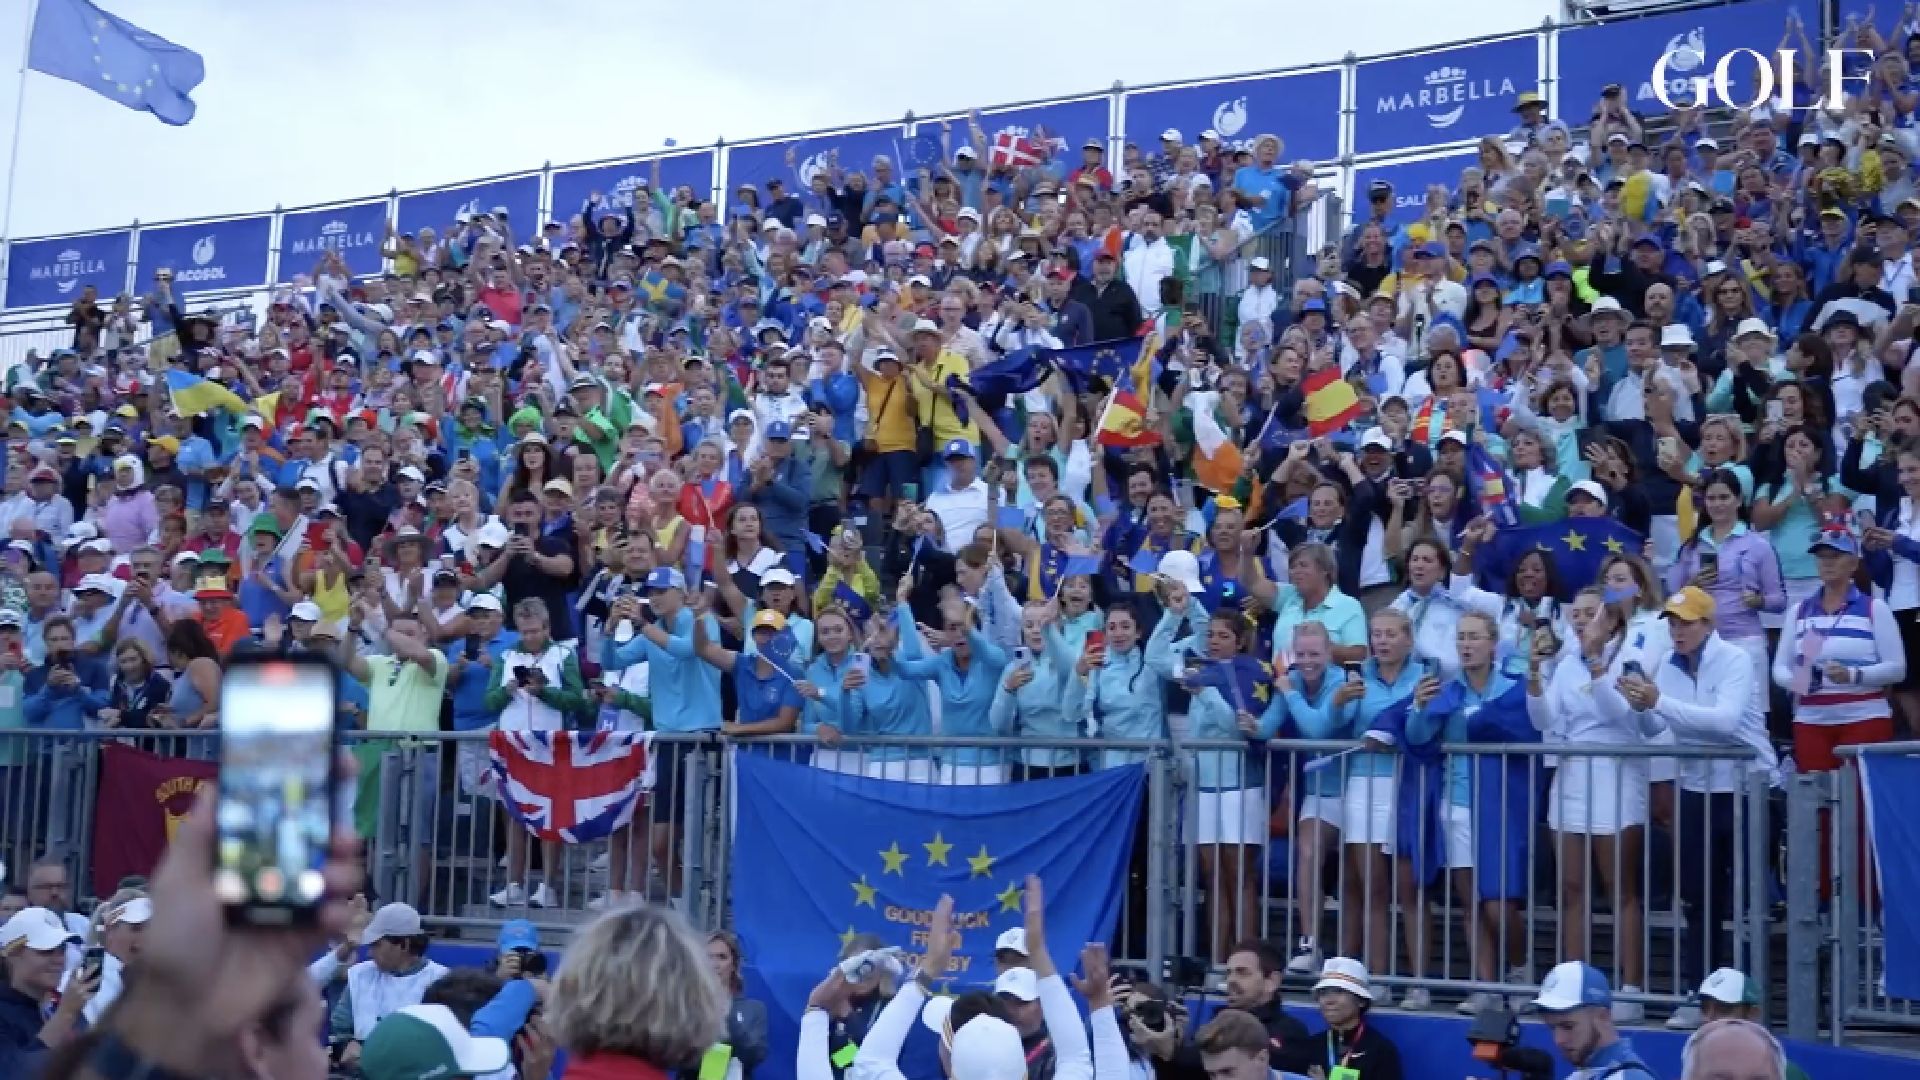 Scenes from the 1st hole party seats at the Solheim Cup